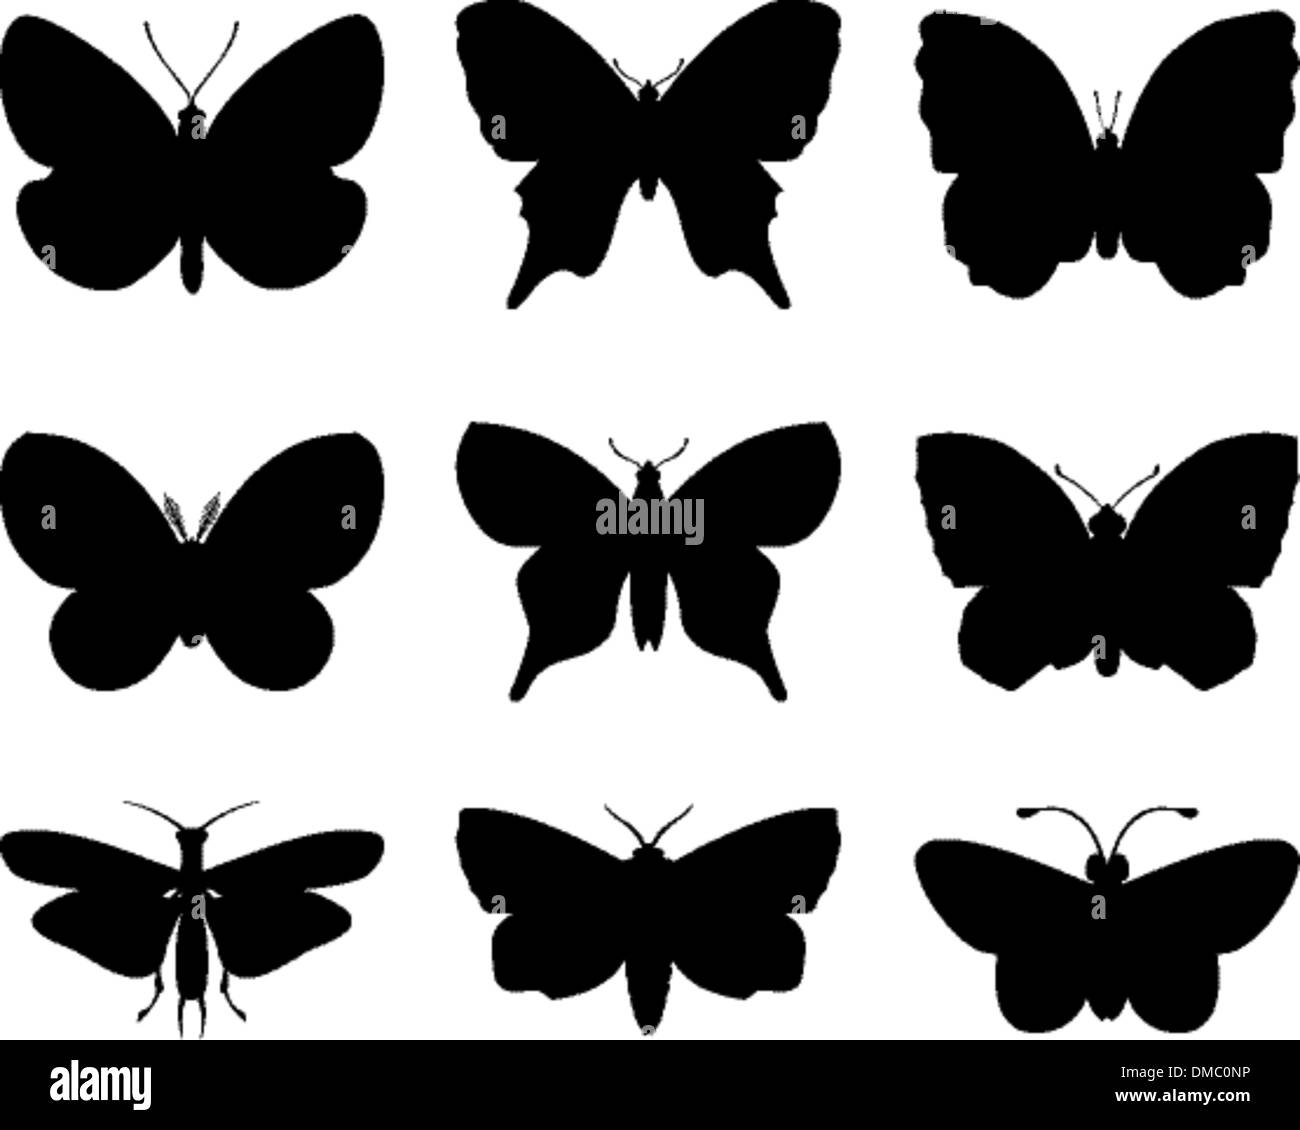 Butterfly Cartoon Black And White Stock Photos Images Alamy